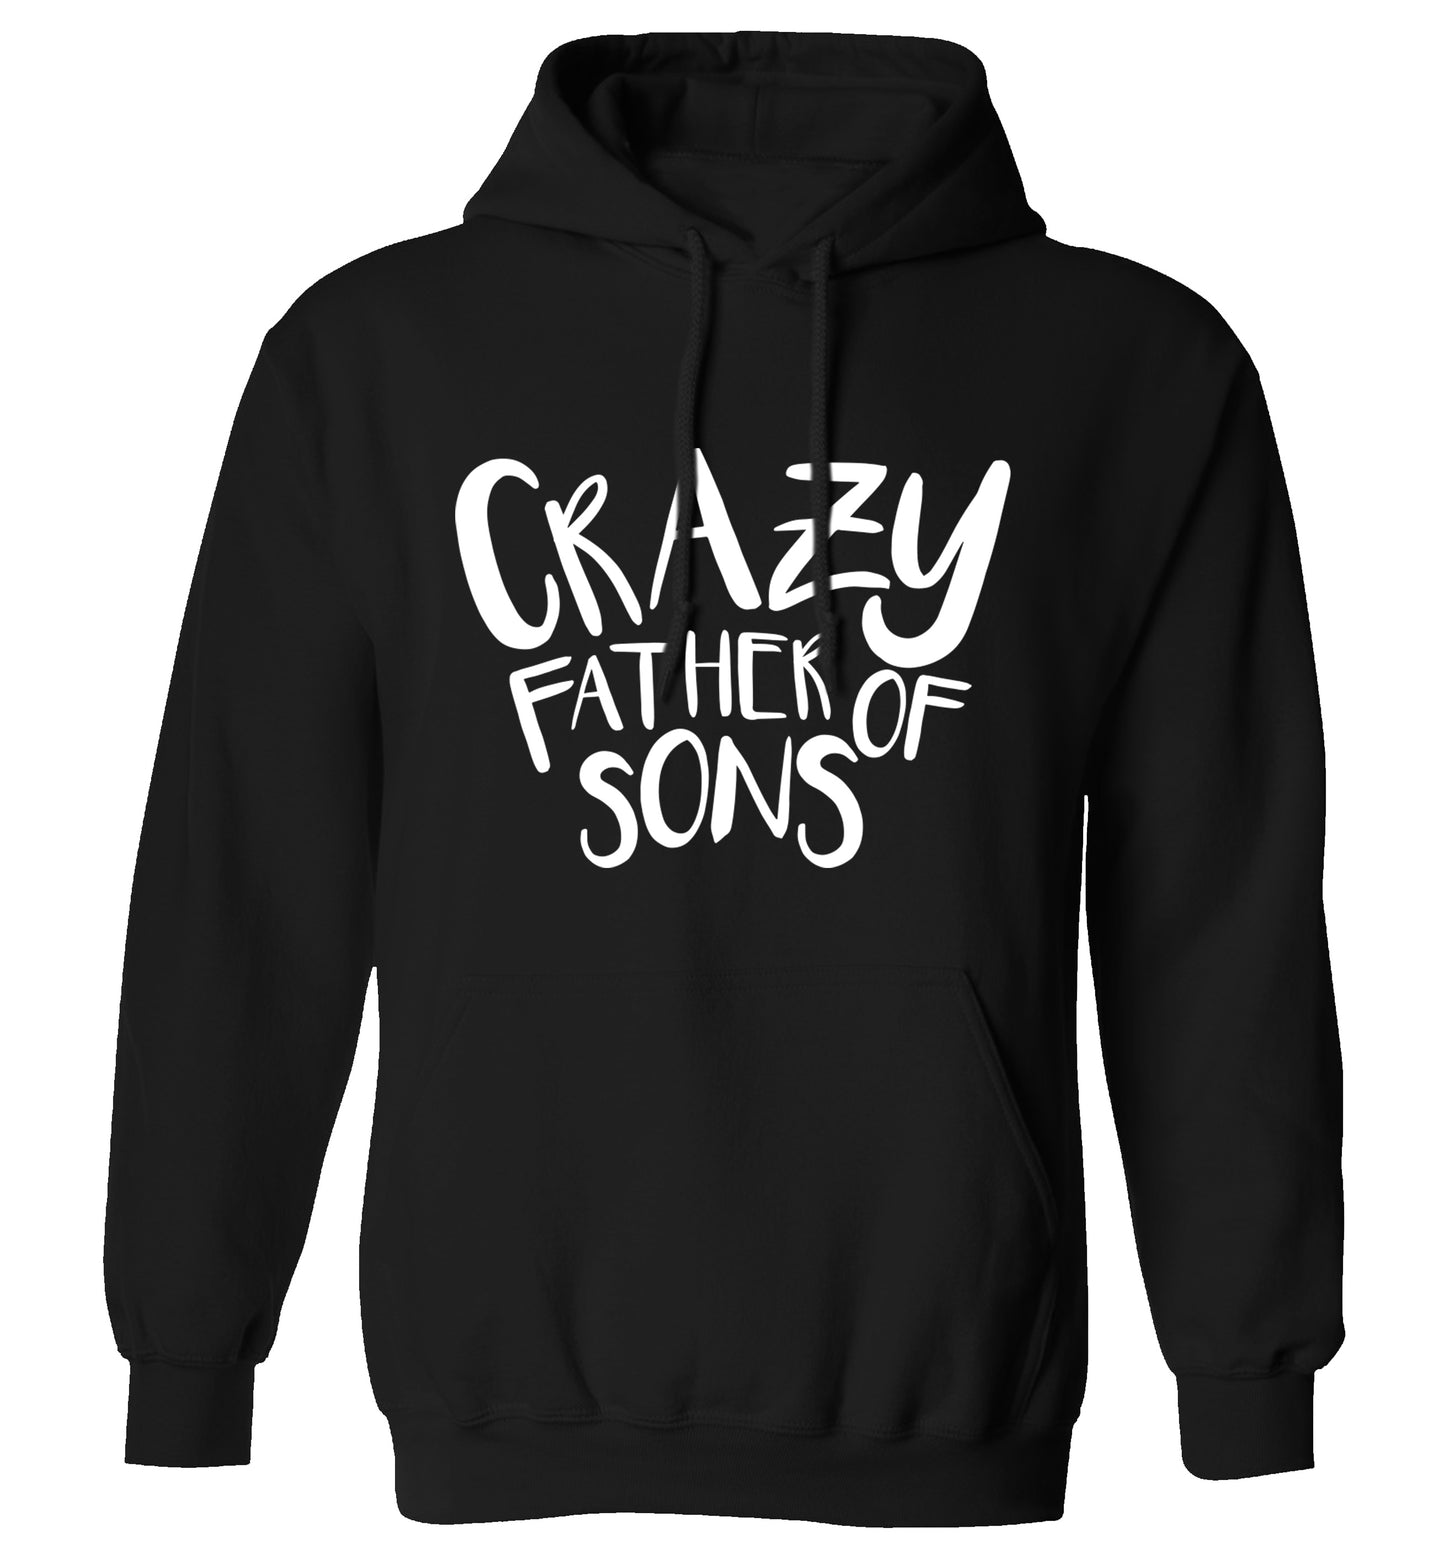 Crazy father of sons adults unisex black hoodie 2XL